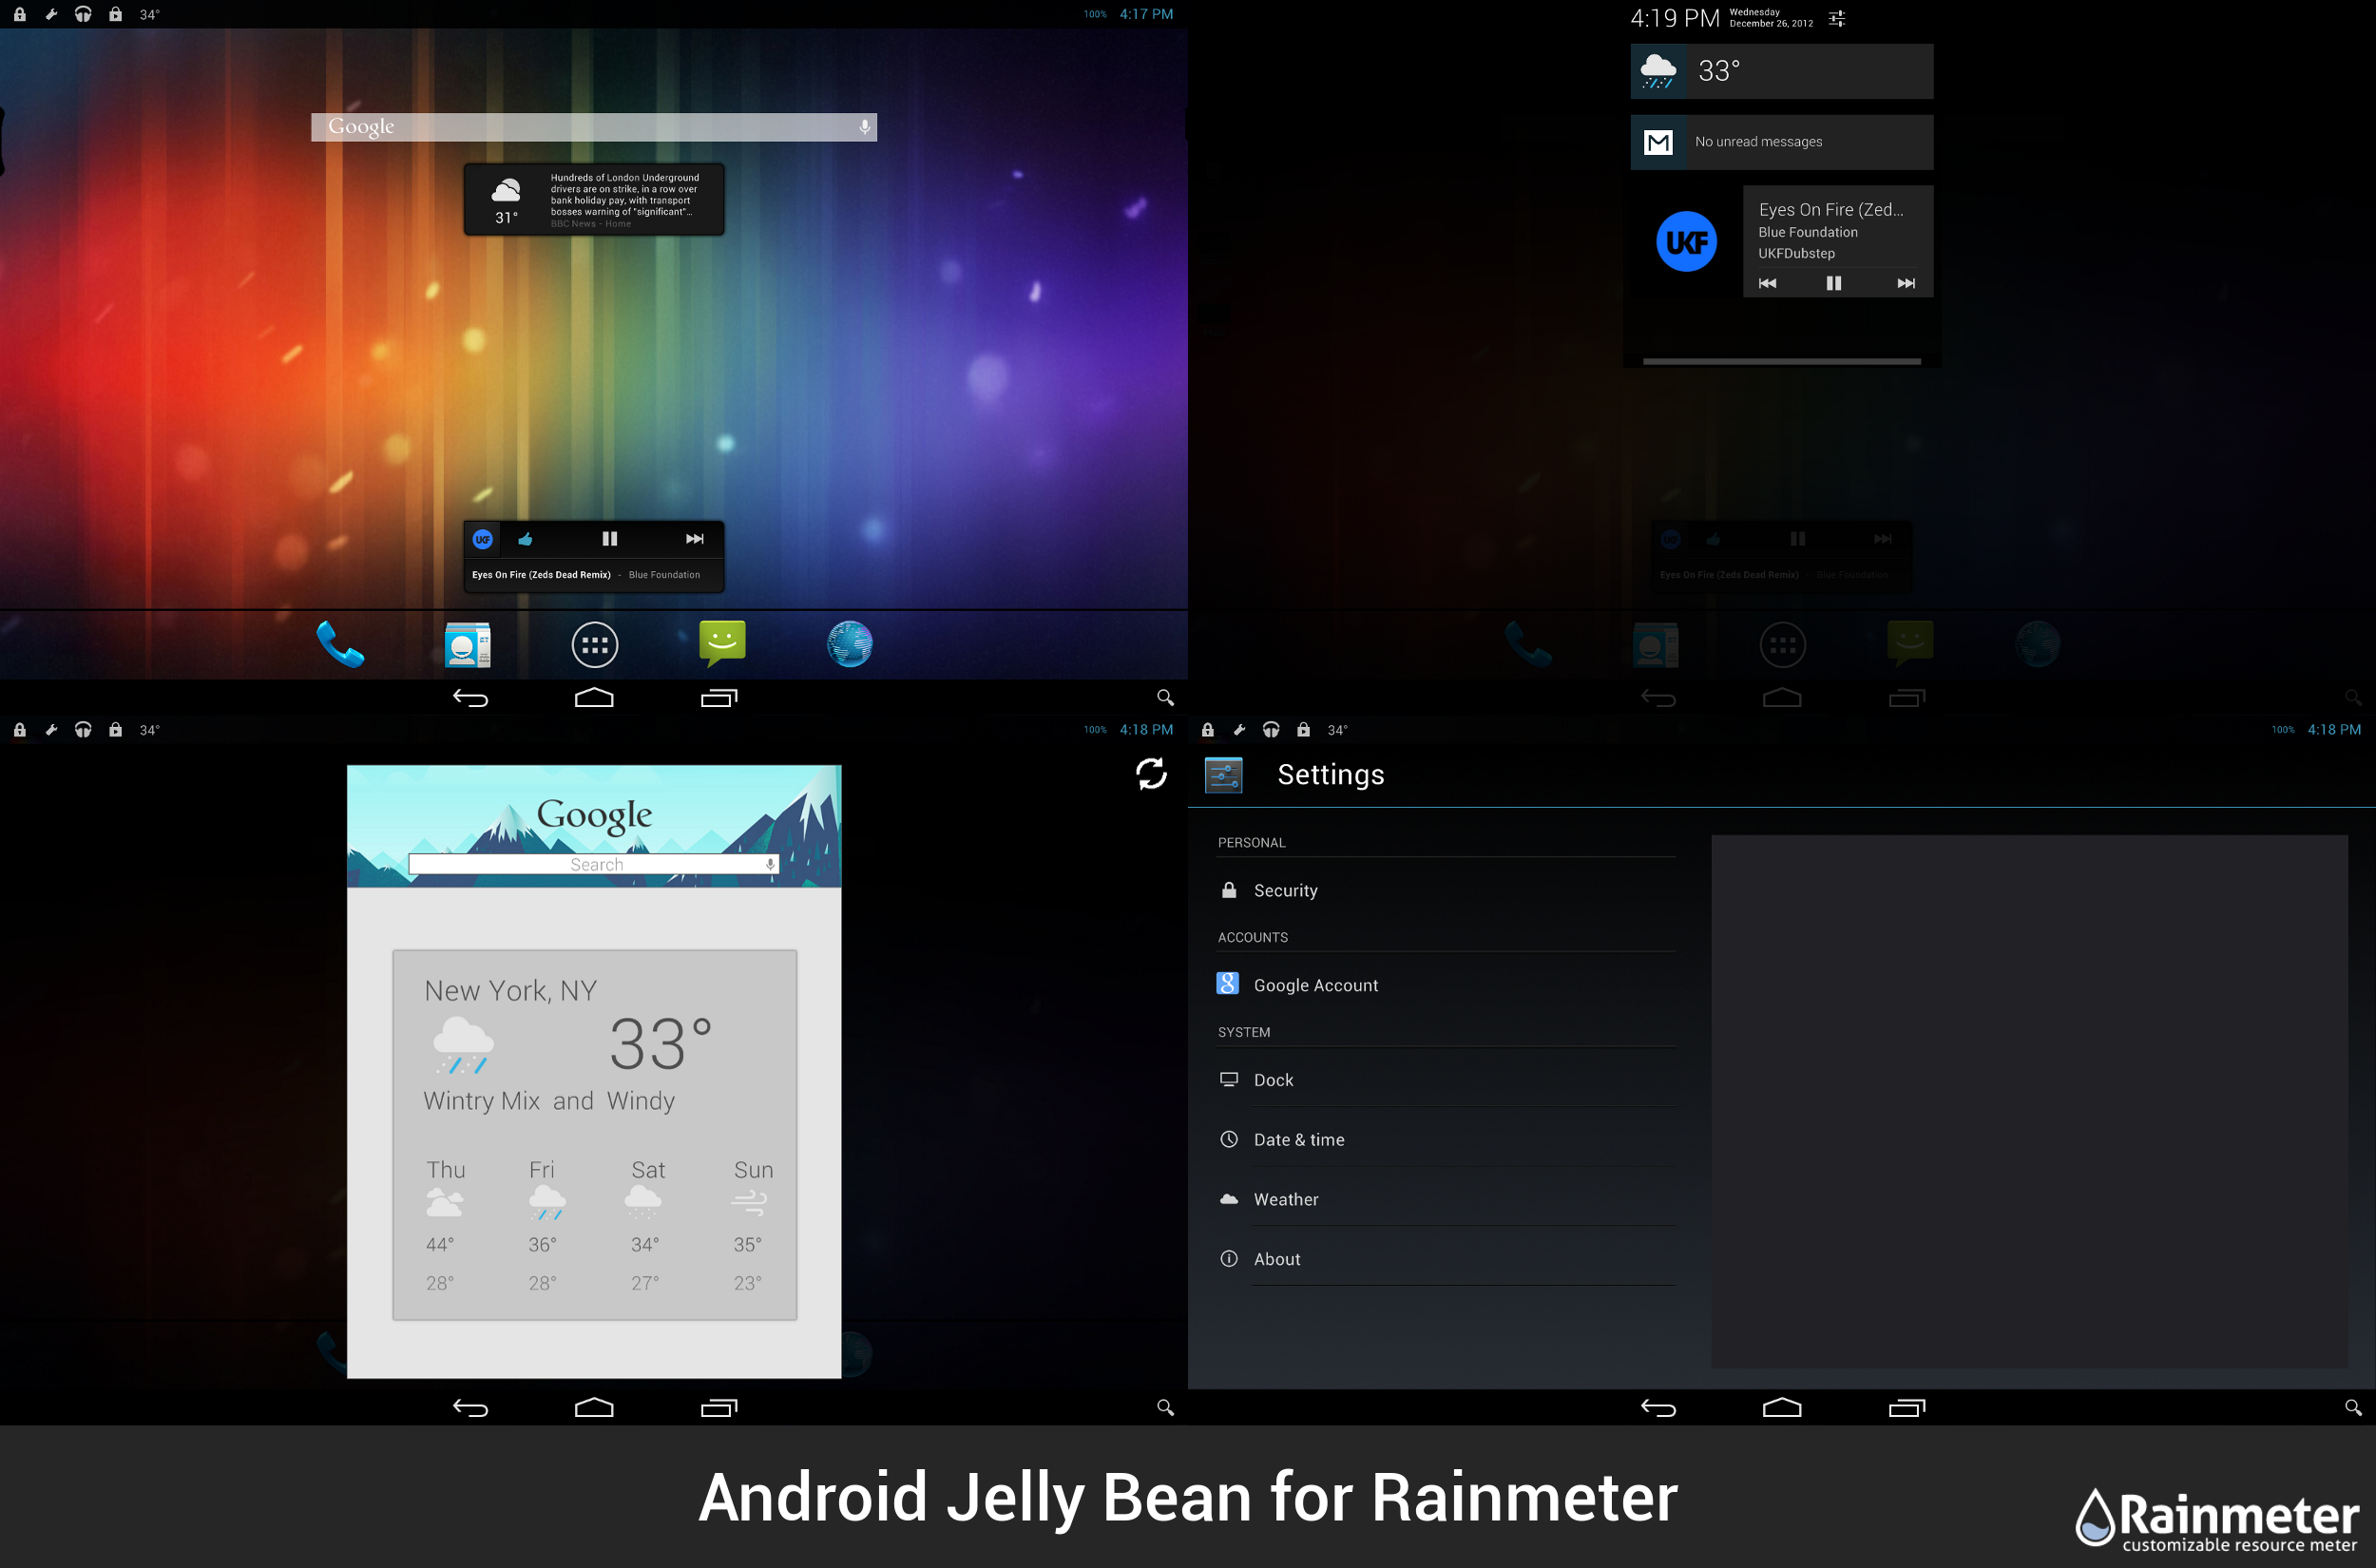 Android Jelly Bean for Rainmeter